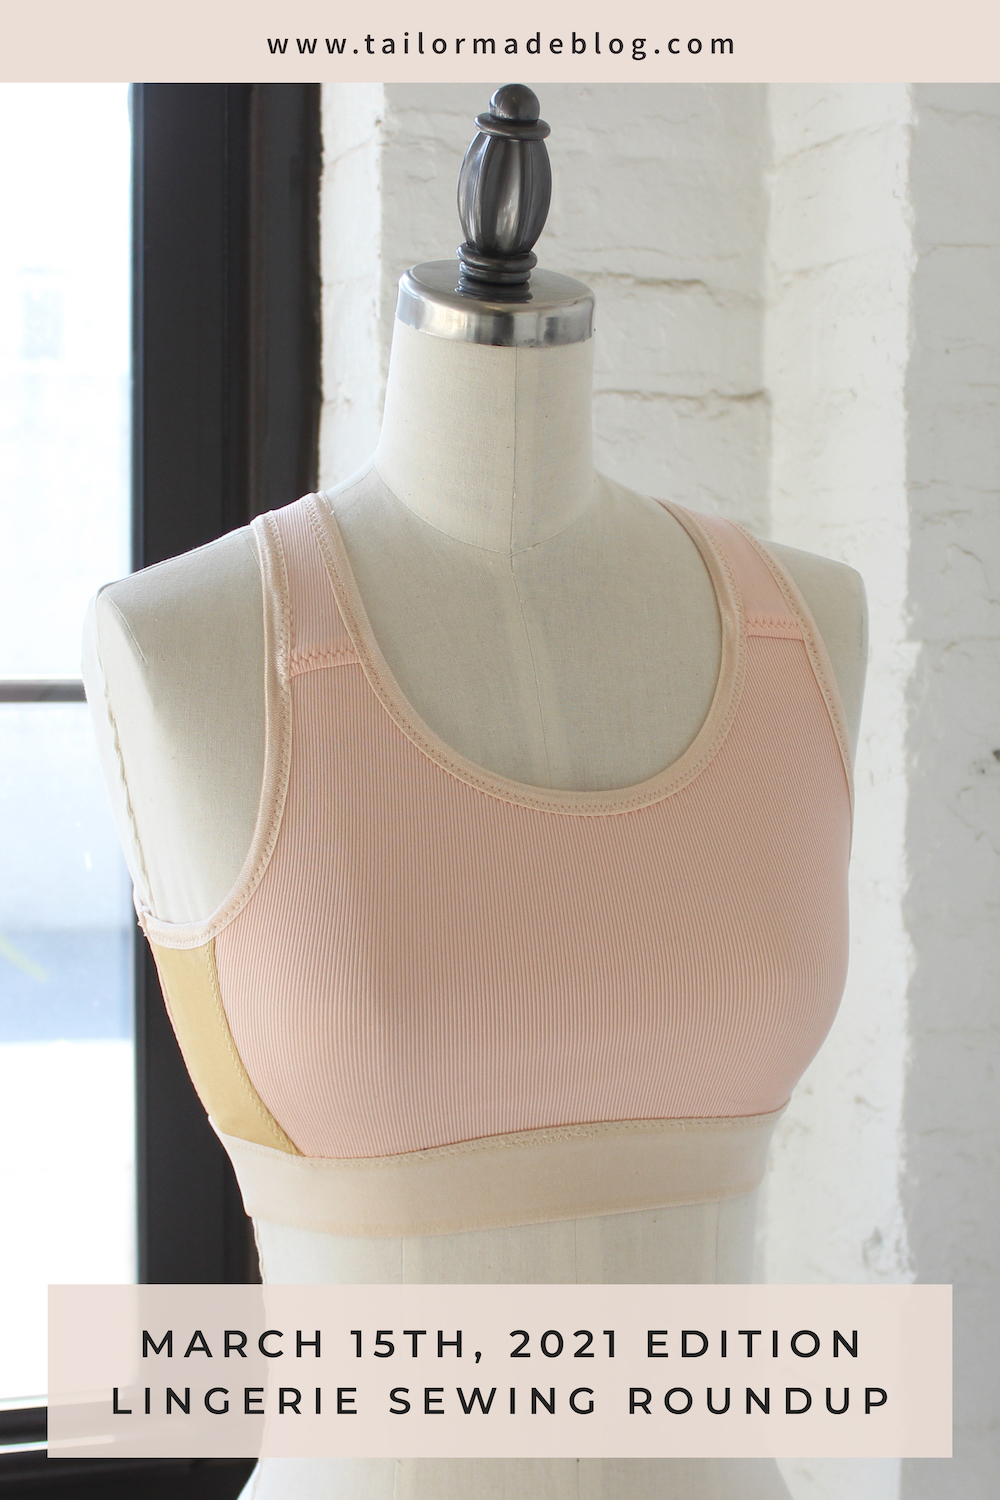 New activewear: The Power Sports Bra from Greenstyle Creations